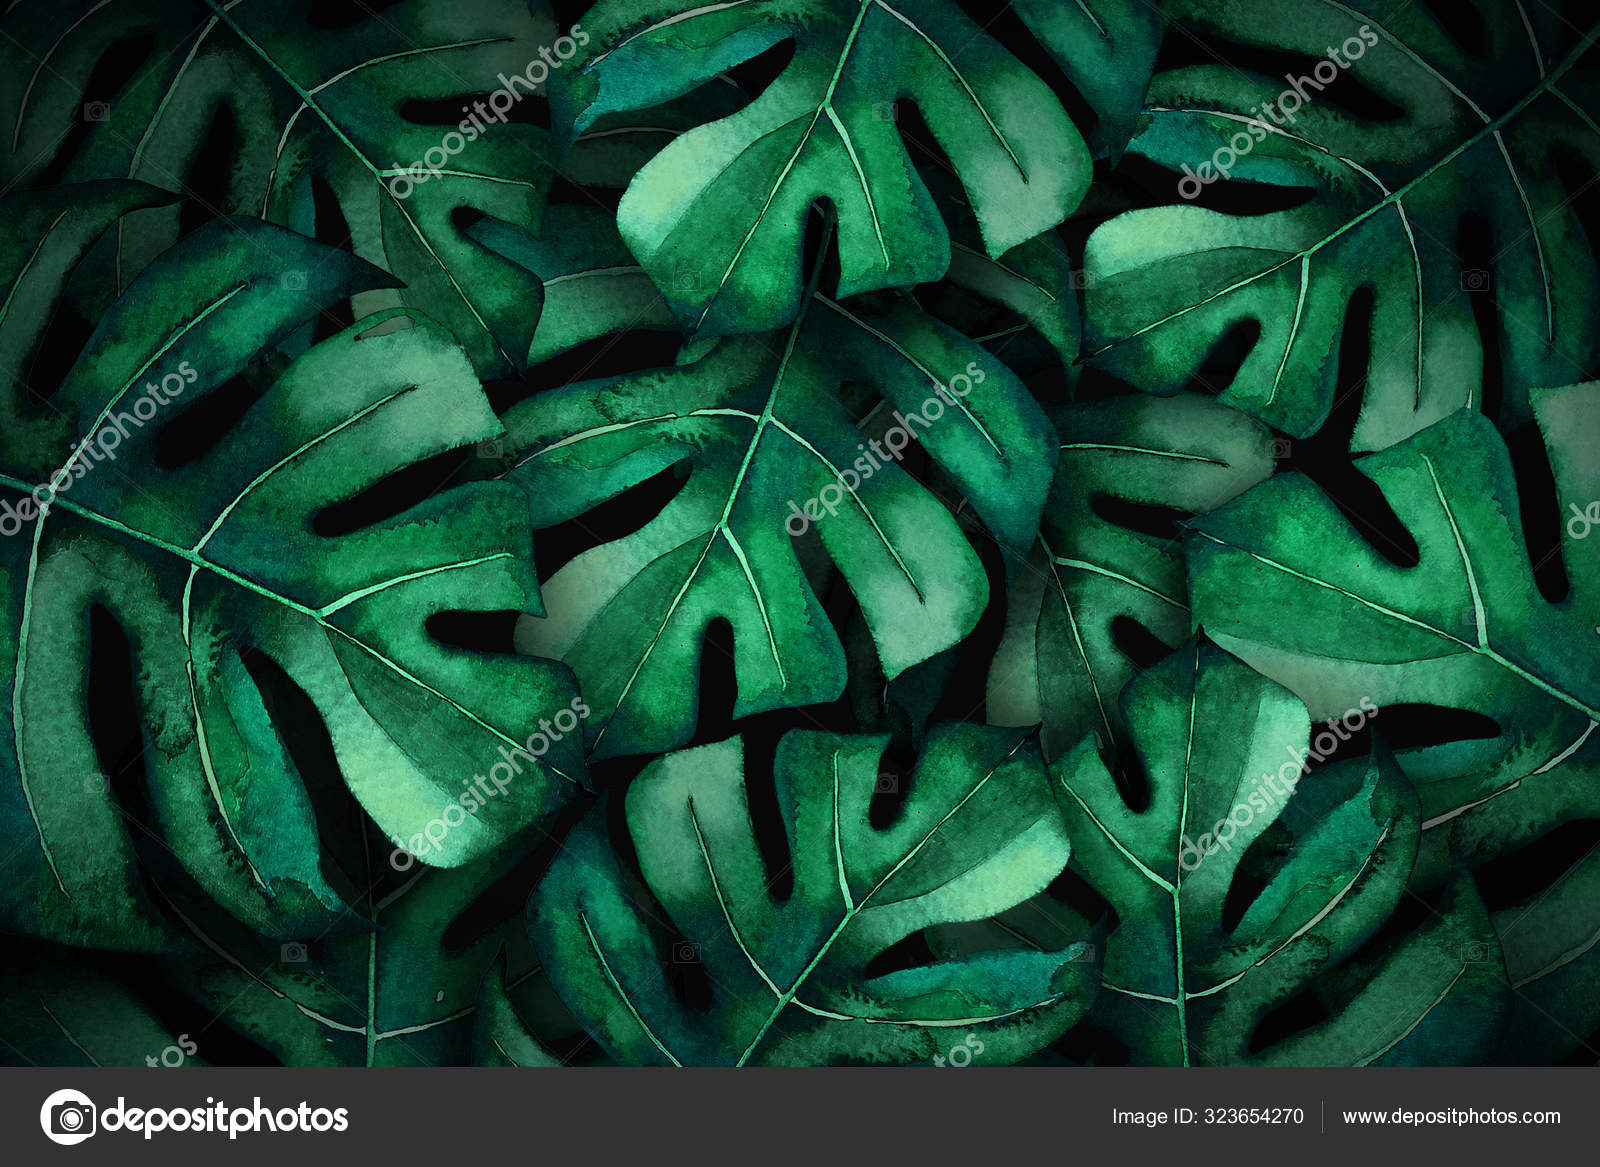 Watercolor tropical background with monstera leaves on a black background. For design of wedding invitations, greeting cards and banners.